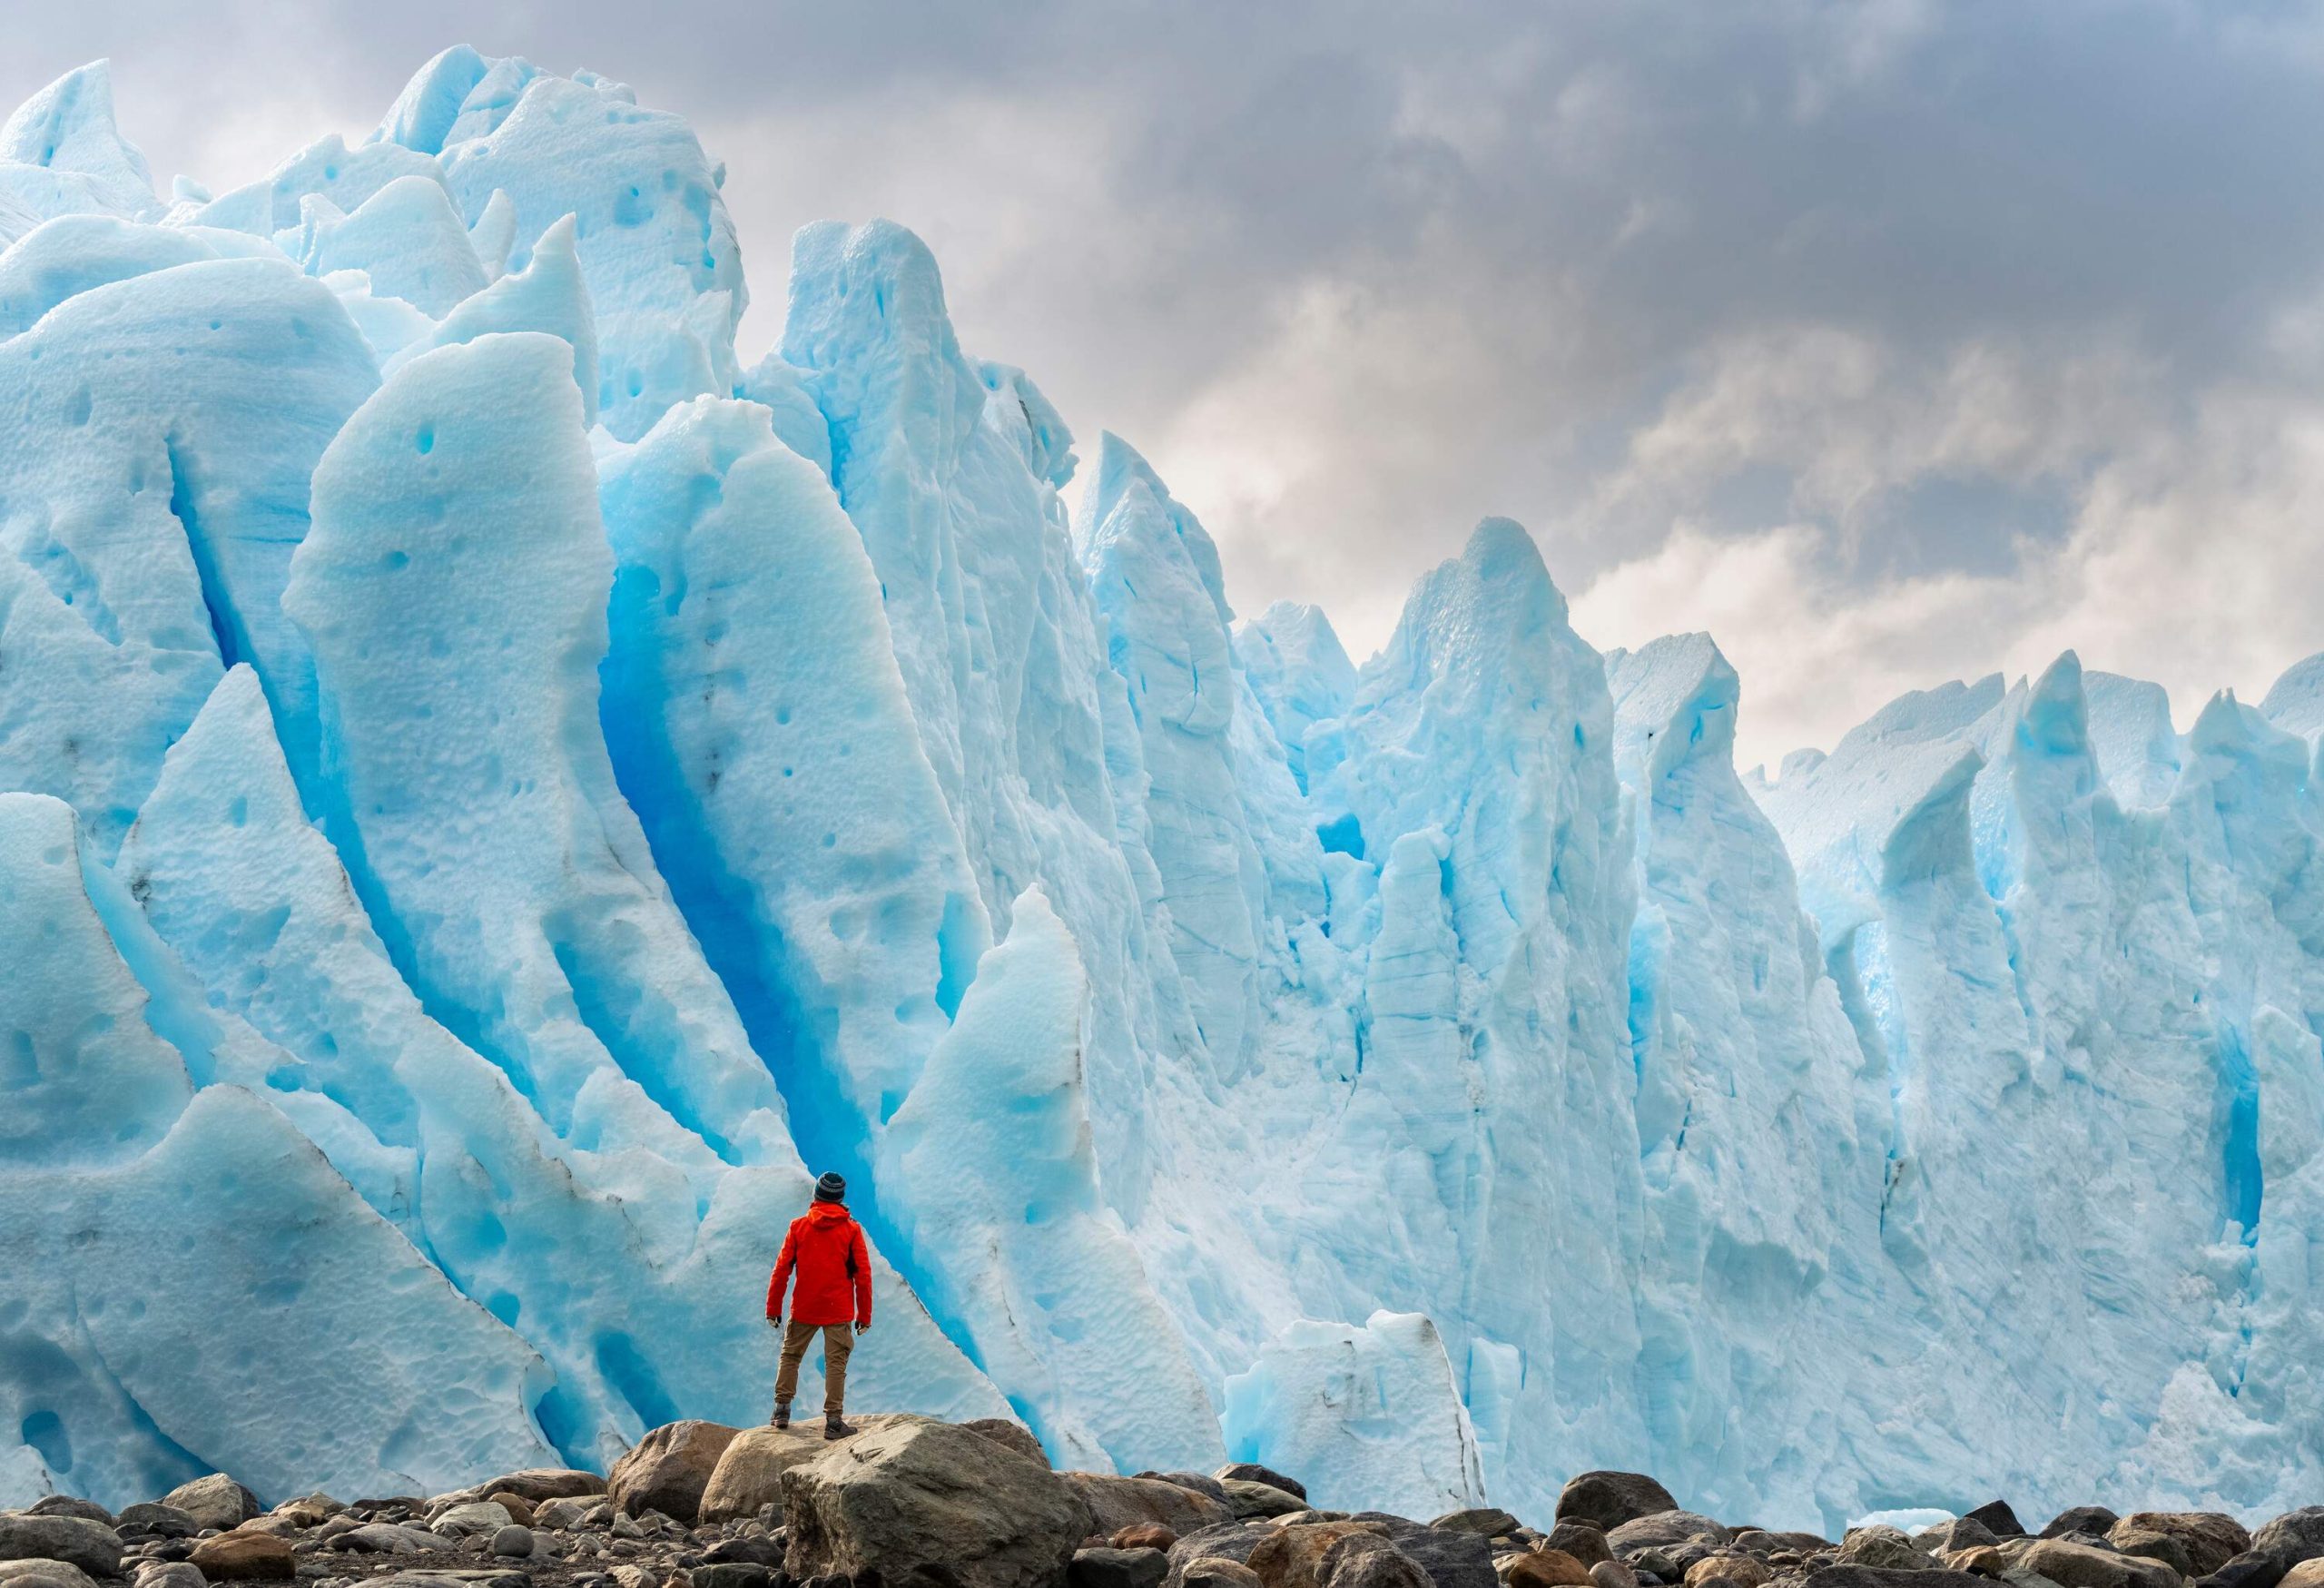 Man in an orange jacket stands on a boulder and watches the glacier's soaring ice formations.